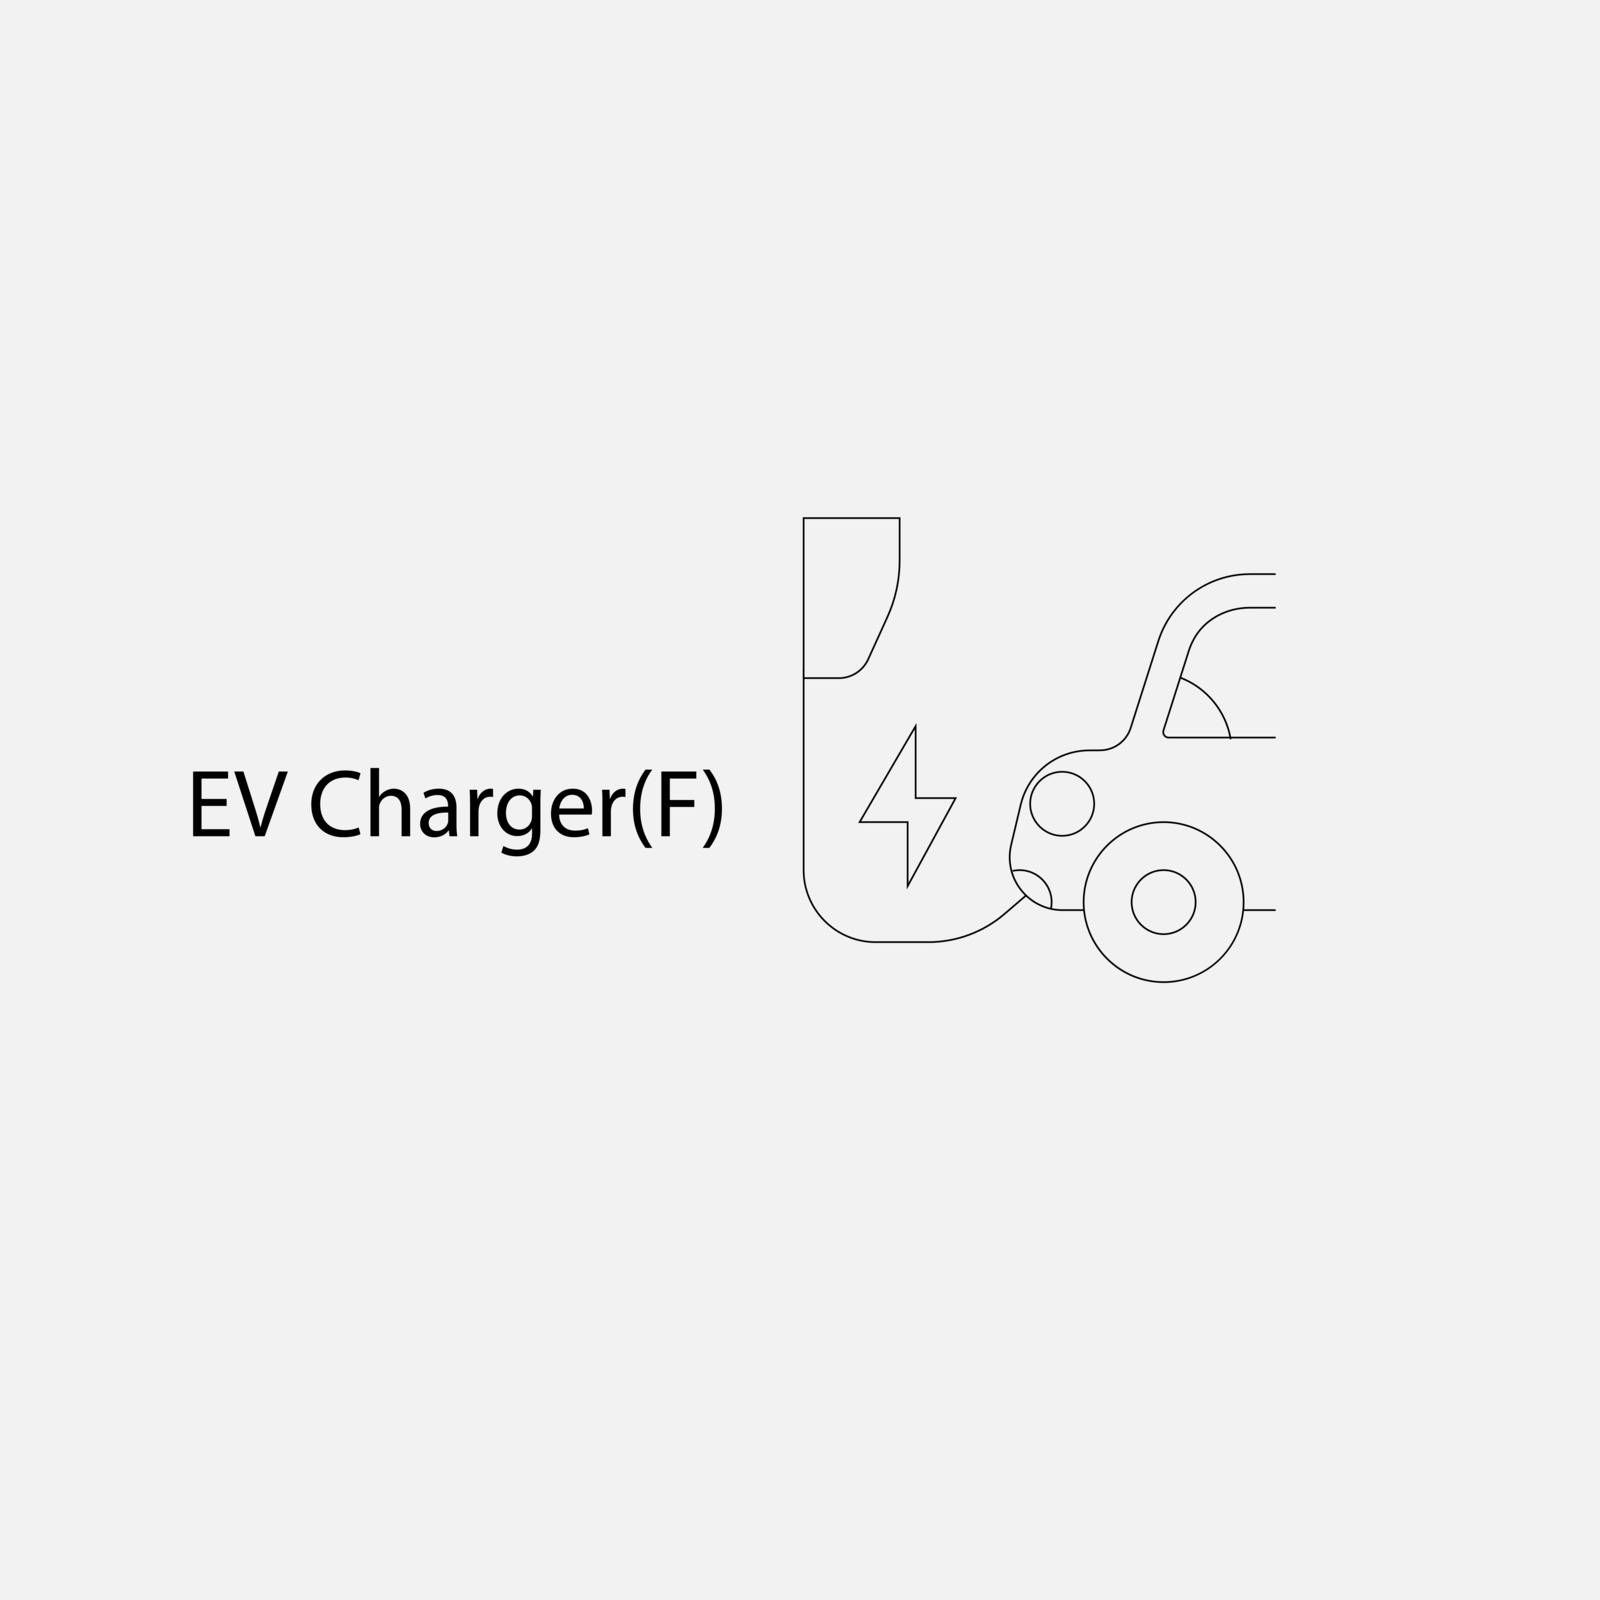 BEV,EV,Battery Electric Vehicle Icon.Electric car icon and charger station. Battery power plug.Home Charging.Solid State Battery.Home Link Devices.Cable Power Supply Connection.Head Charger. 64 Pixels thin line icon
